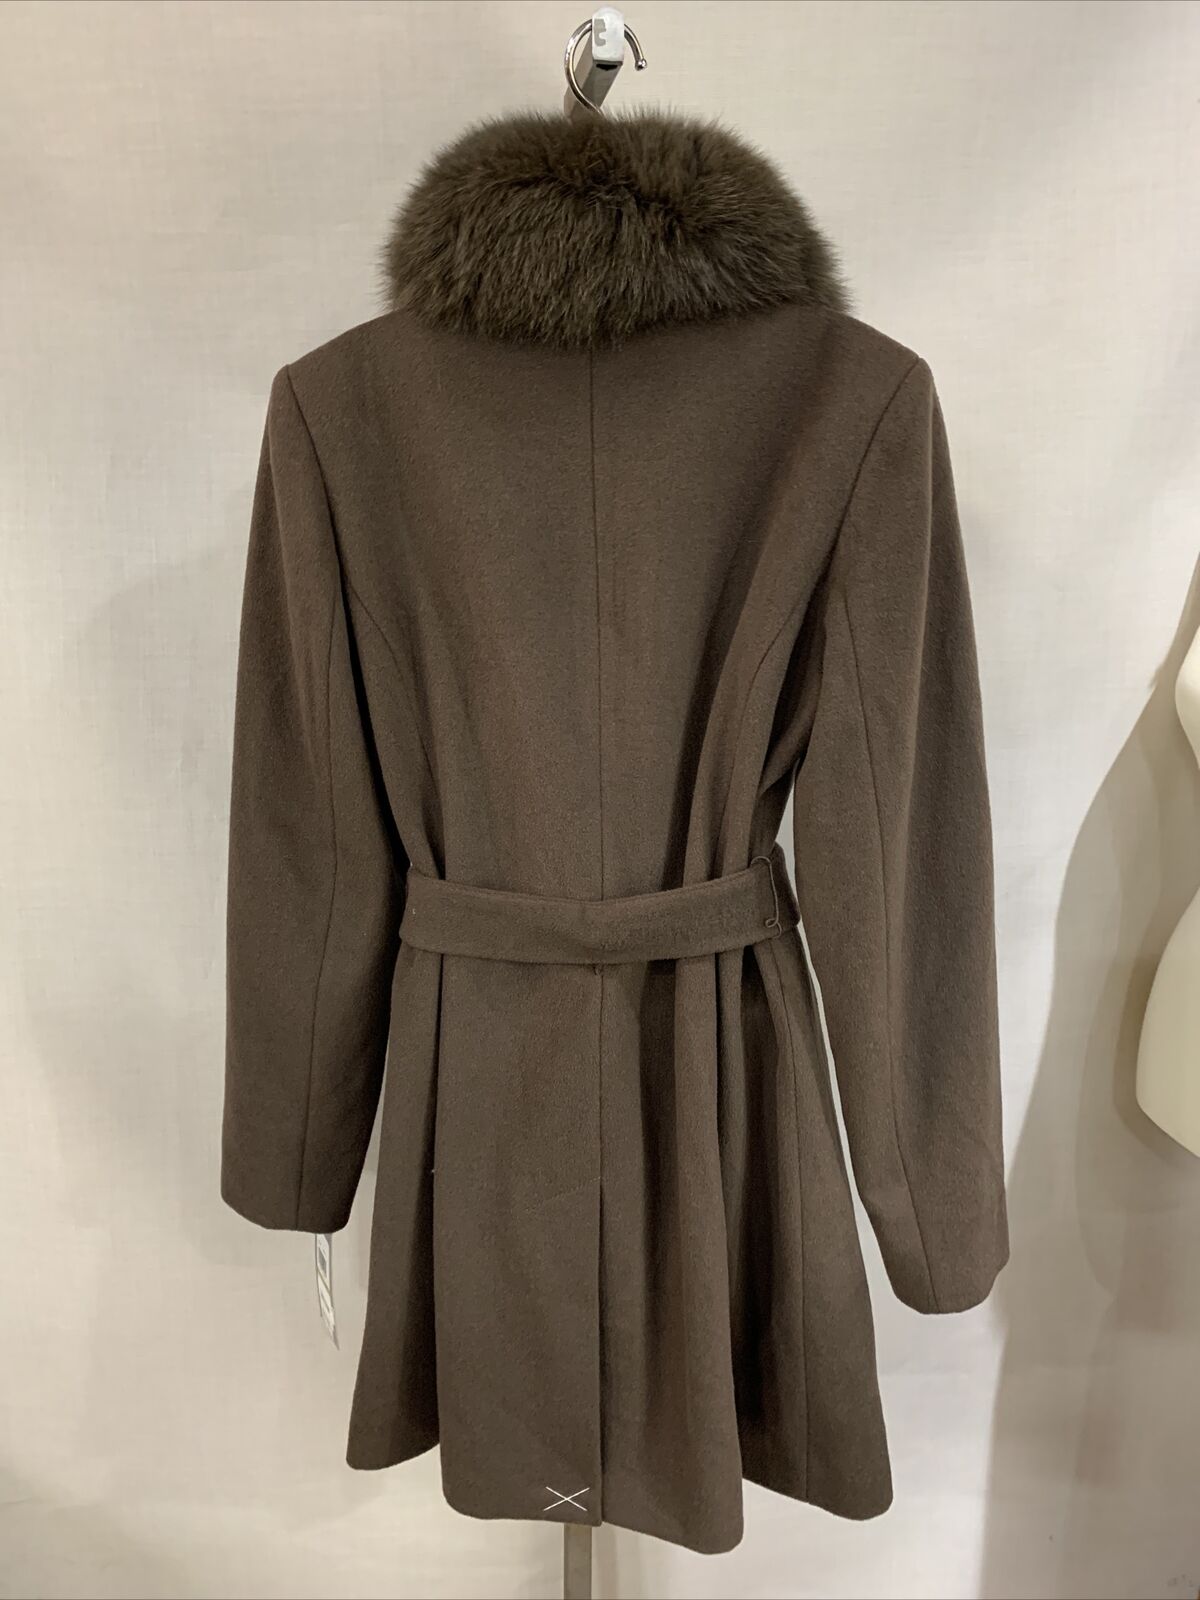 Forecaster Women’s Fox-Fur-Collar Belted Wrap Coat   68049 Size 8